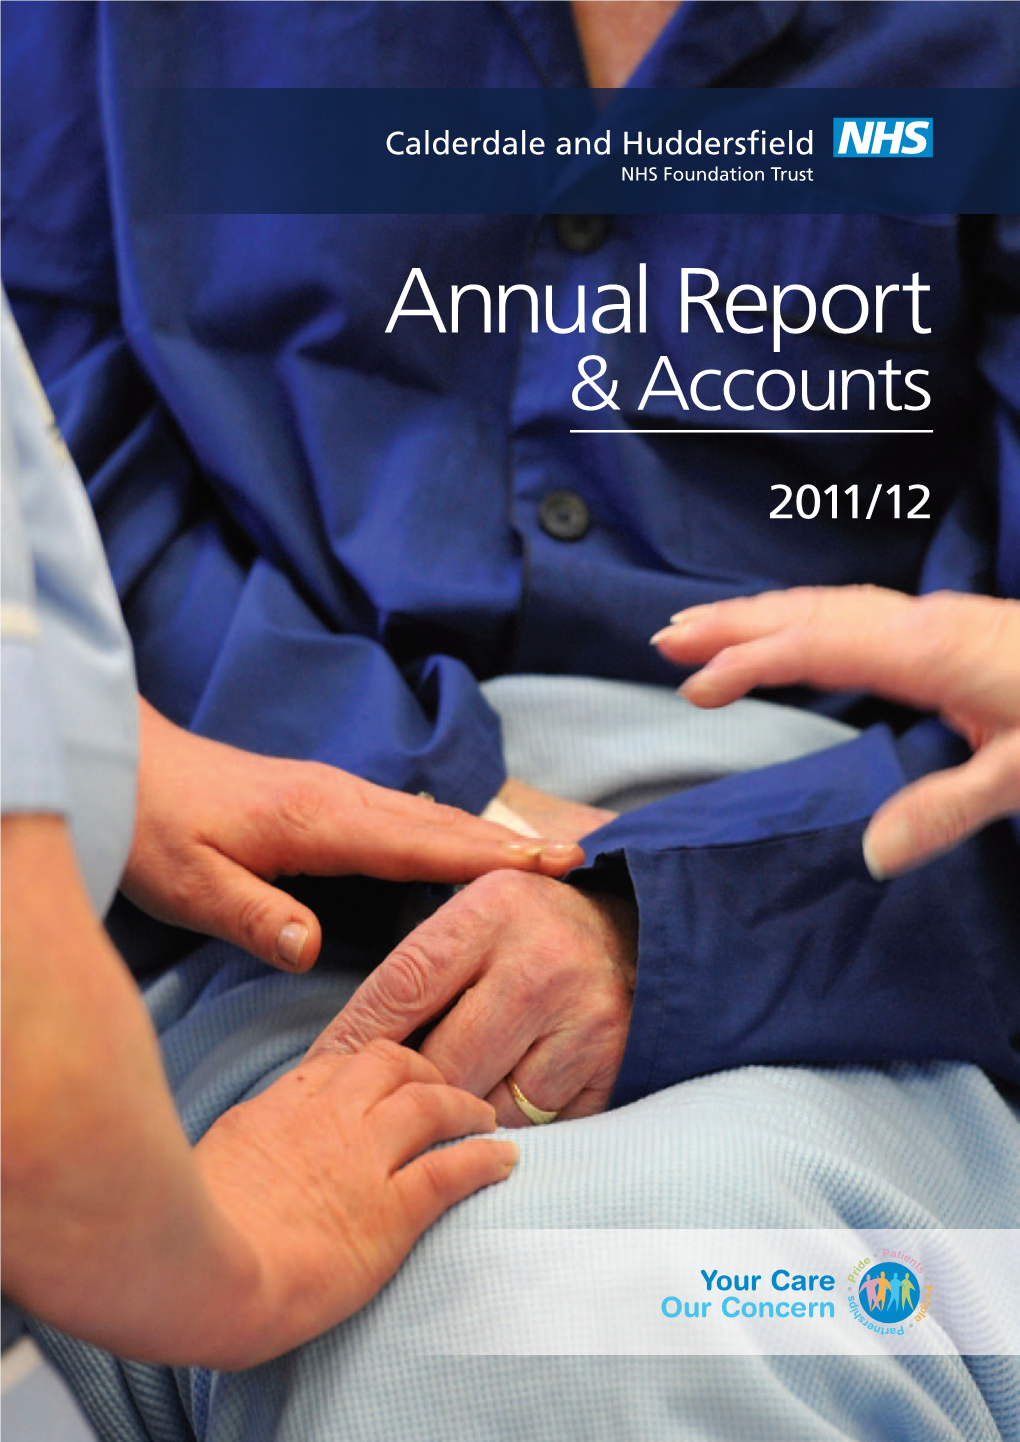 Full Annual Report and Accounts 2011/12